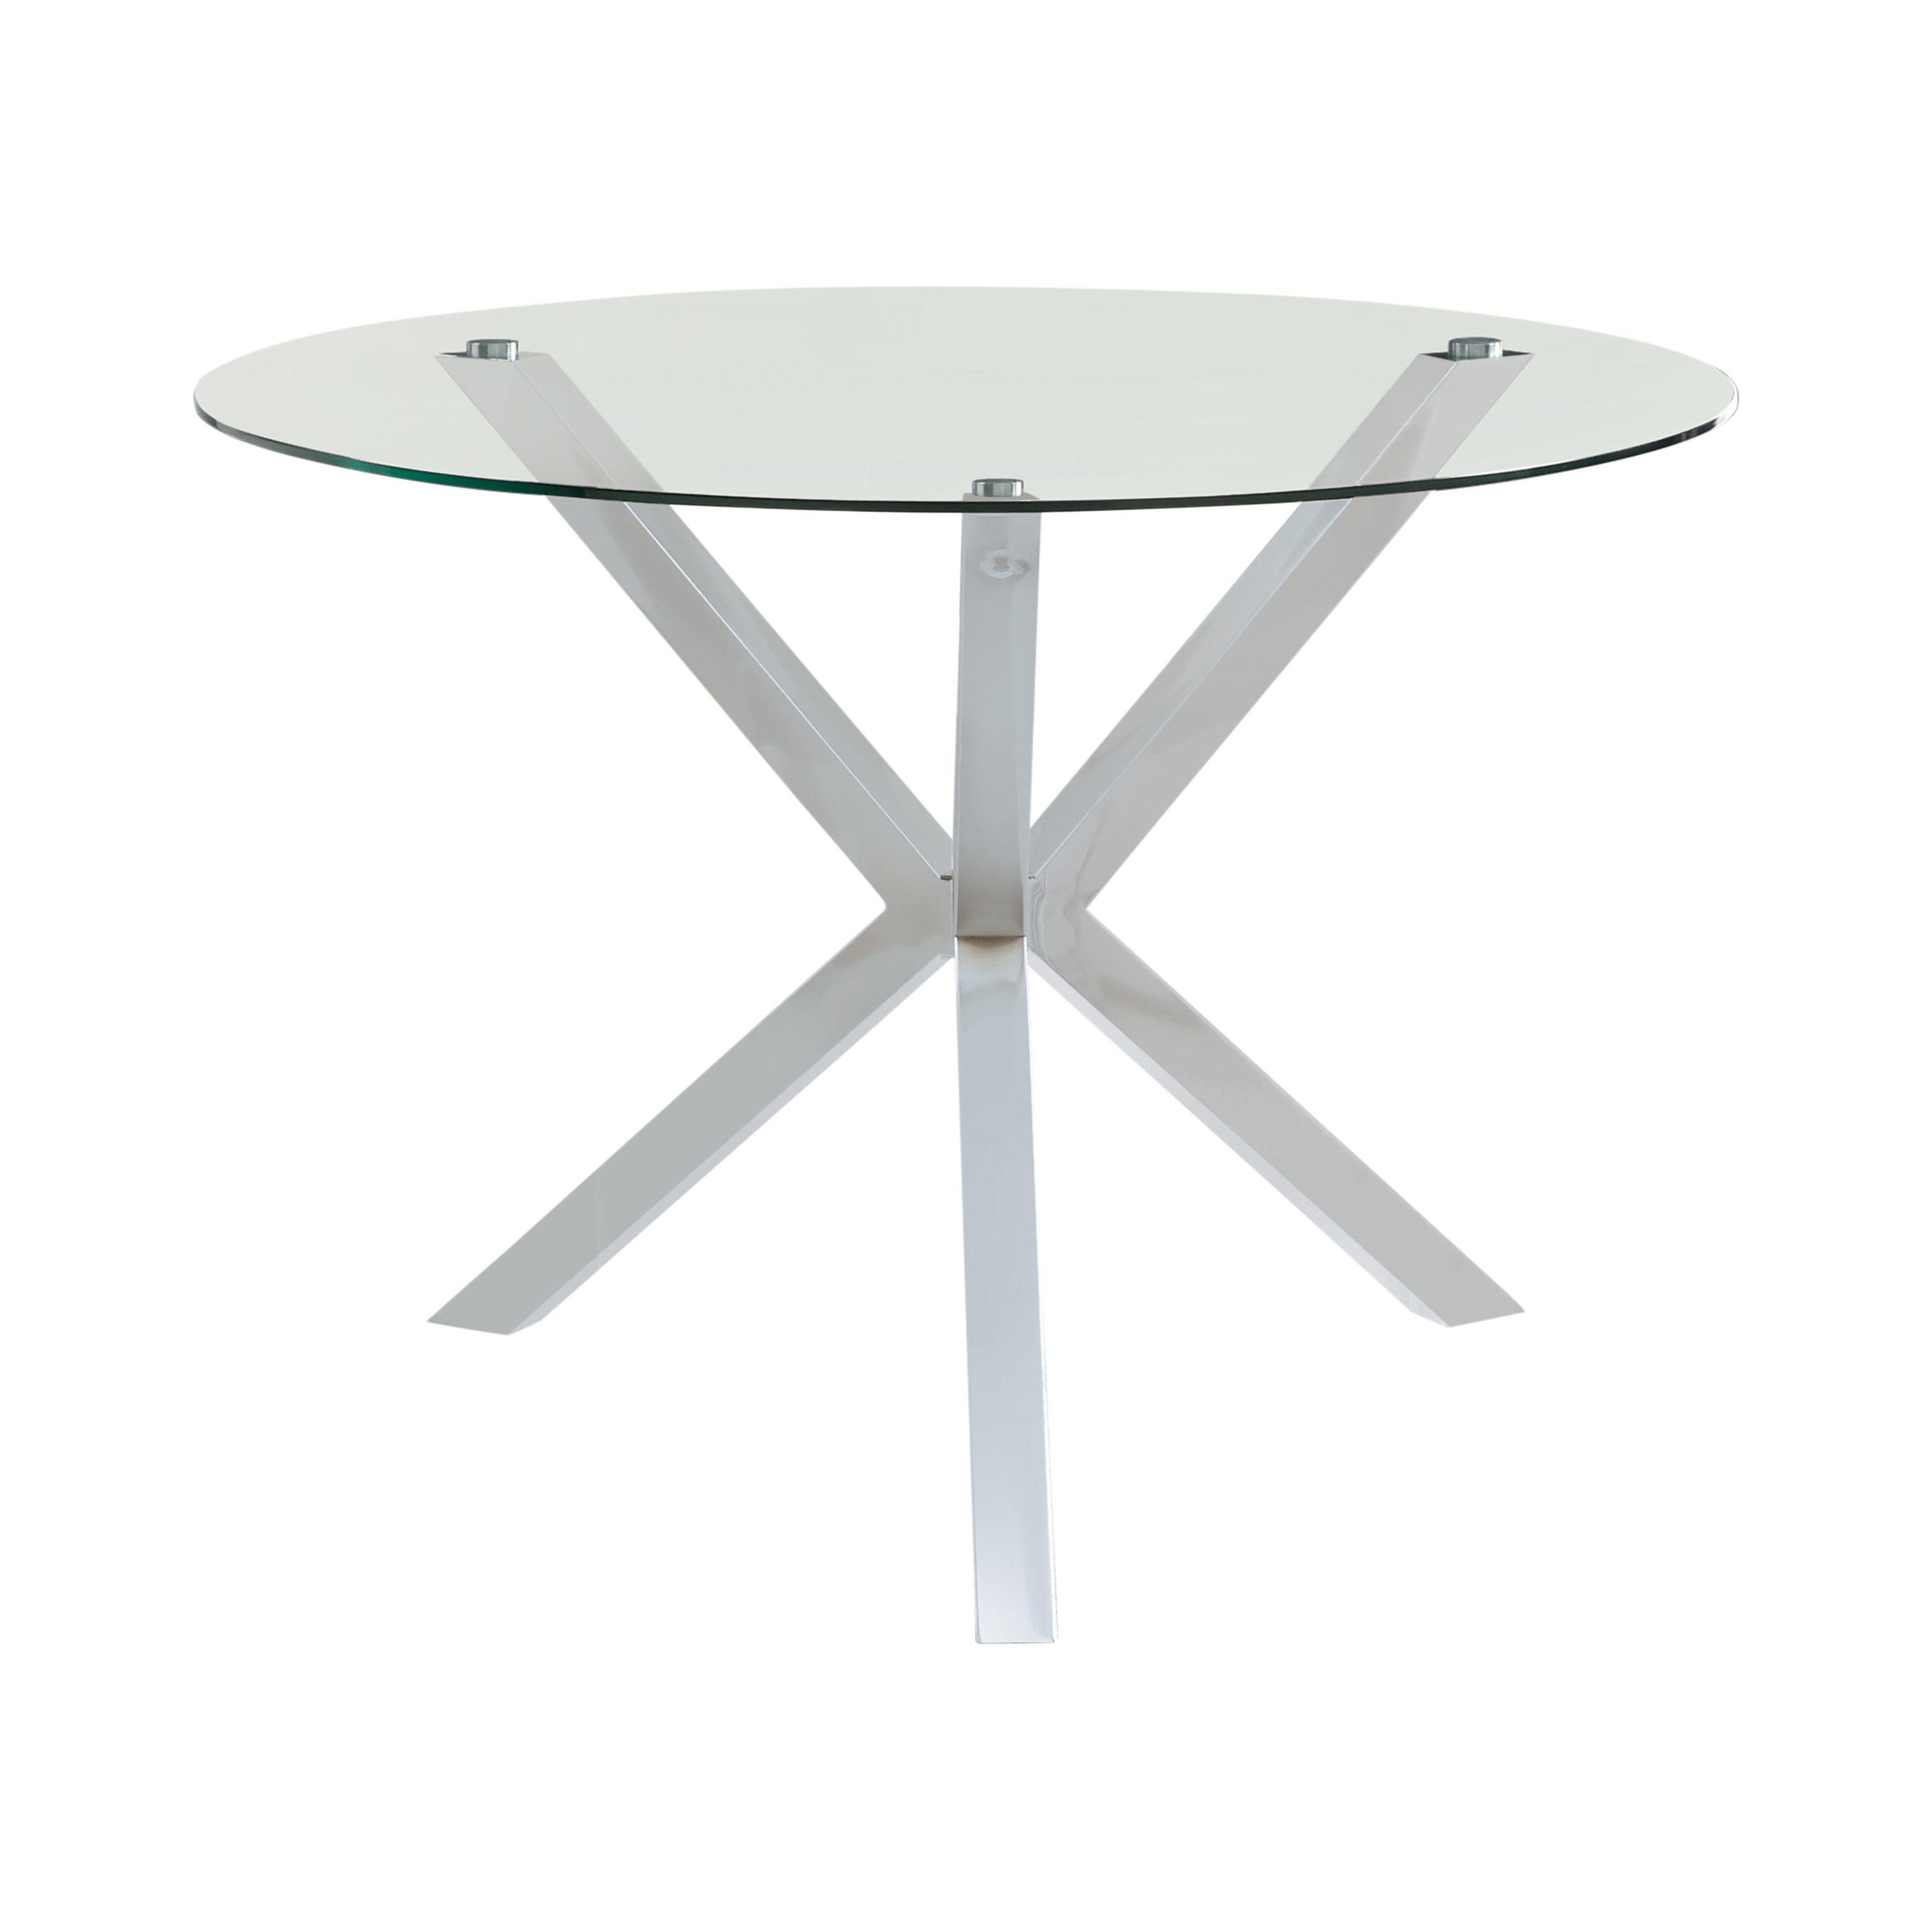 Contemporary Dining Table 120760 Vance 120760 in White 